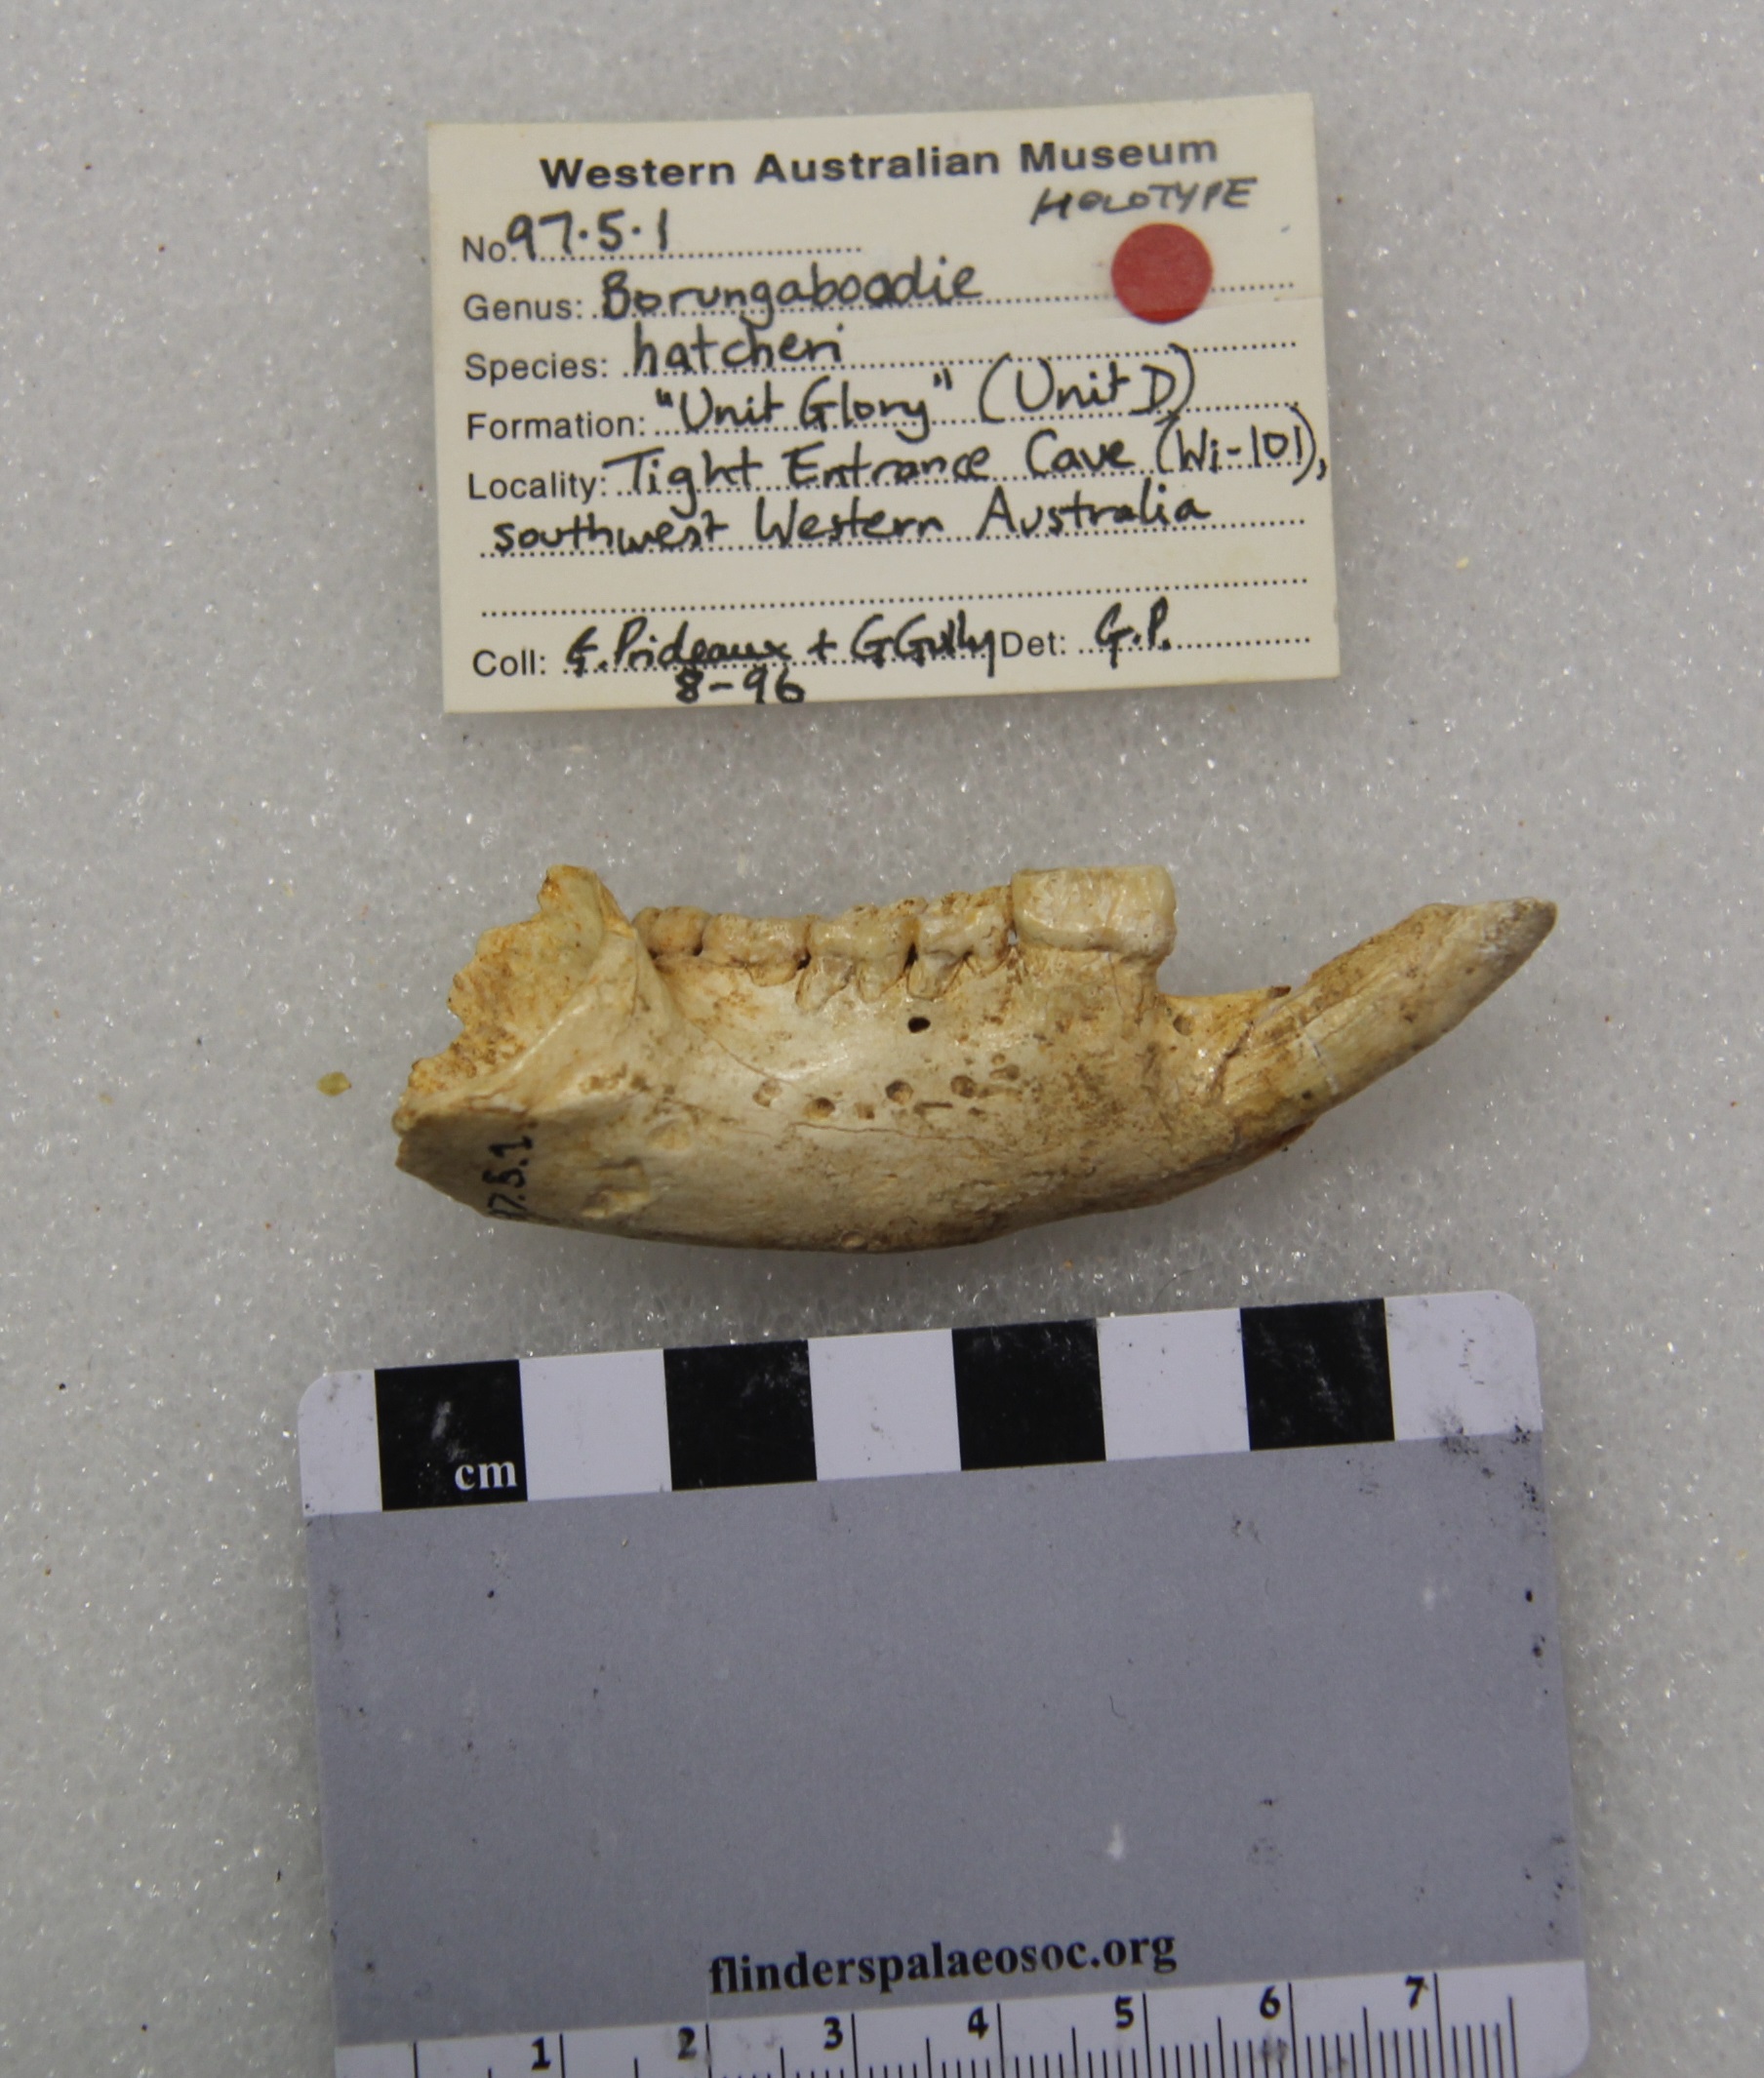 The holotype of Borungaboodie hatcheri, a right dentary from Tight Entrance Cave, southwestern WA.